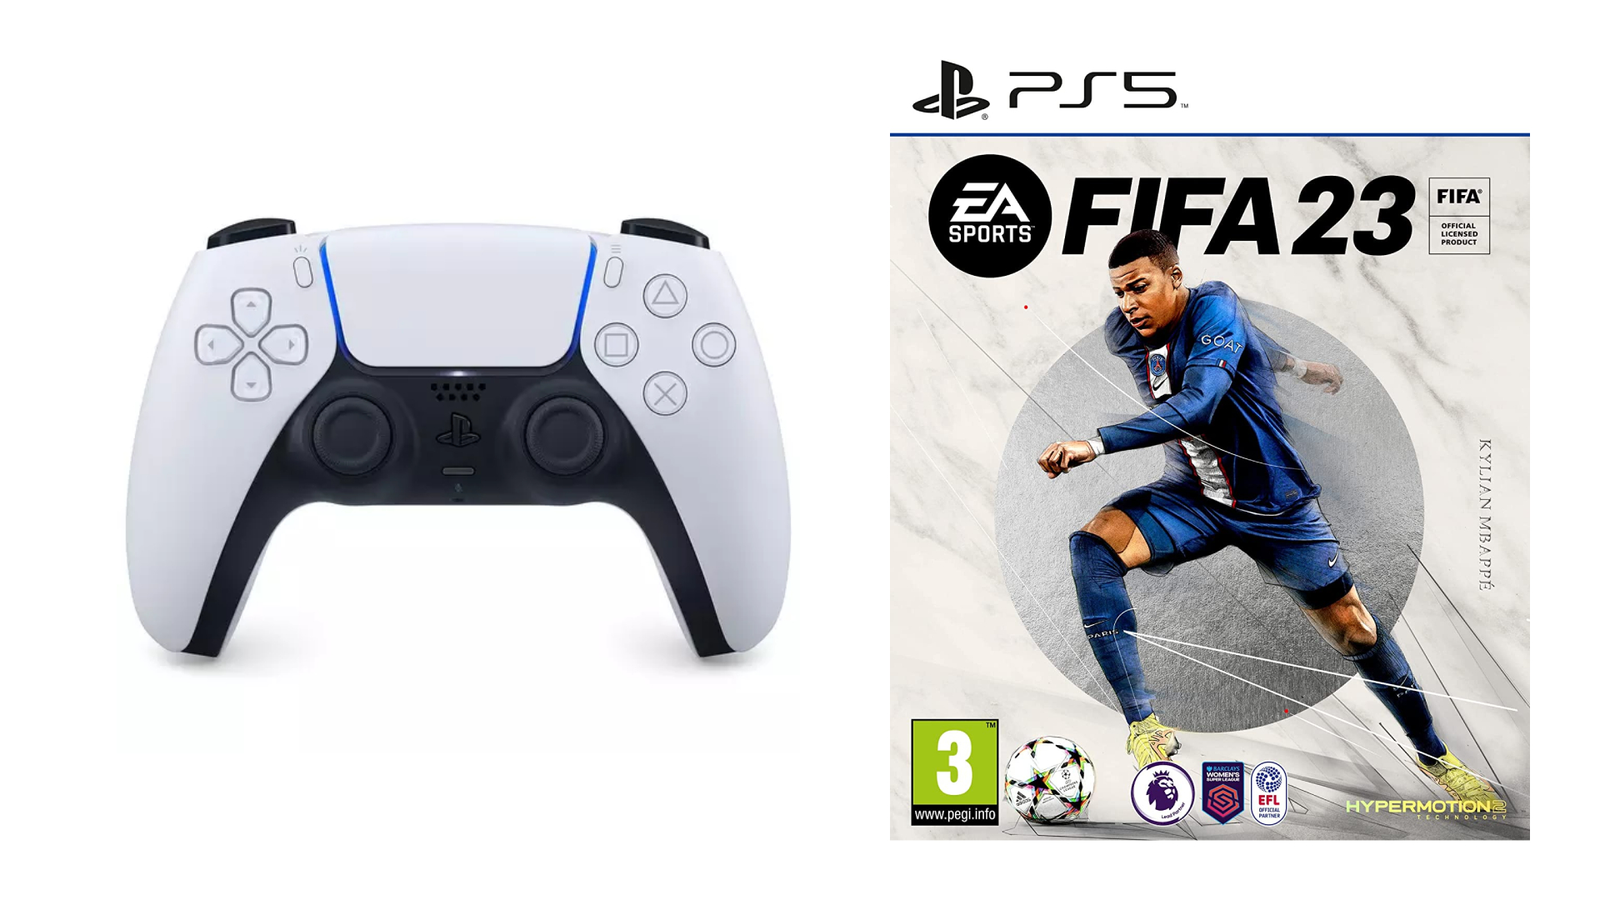 FIFA 23 hits game pass ultimate soon, I needed a new controller